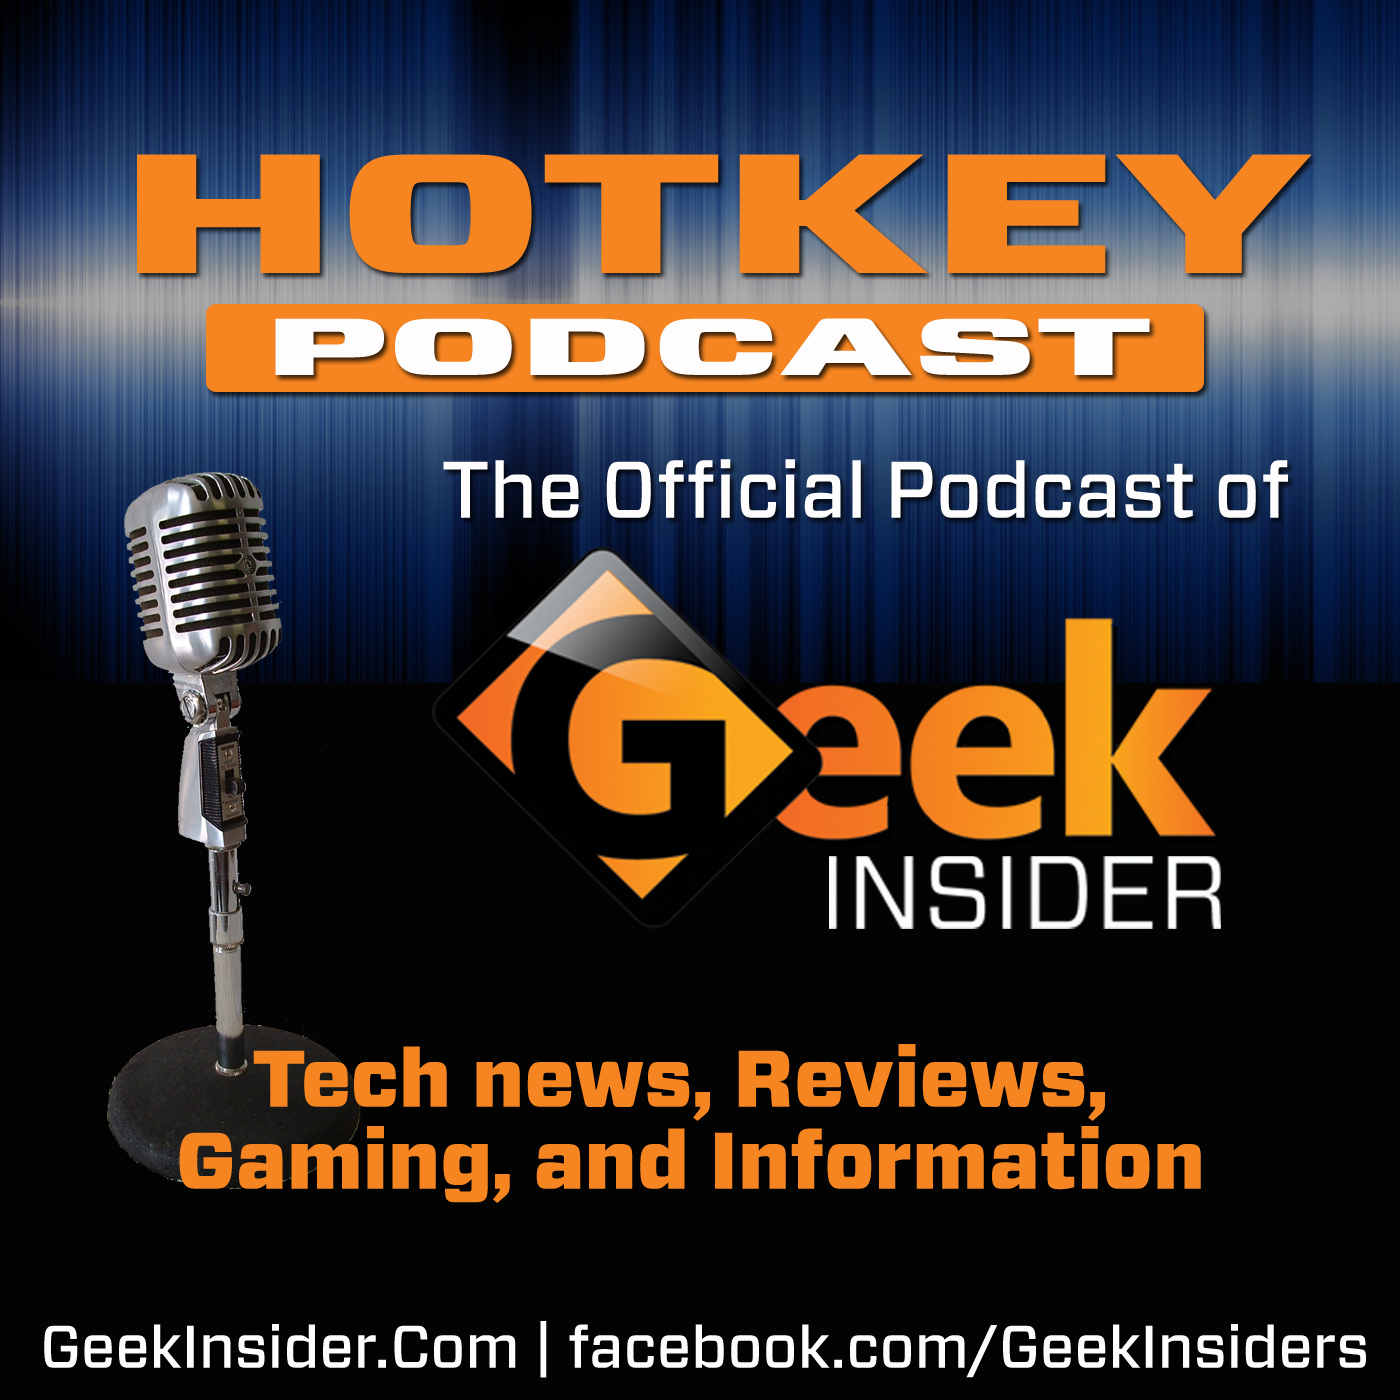 Geek insider, geekinsider, geekinsider. Com,, hotkey: the official podcast of geek insider #4 - 09. 04. 13, podcasts